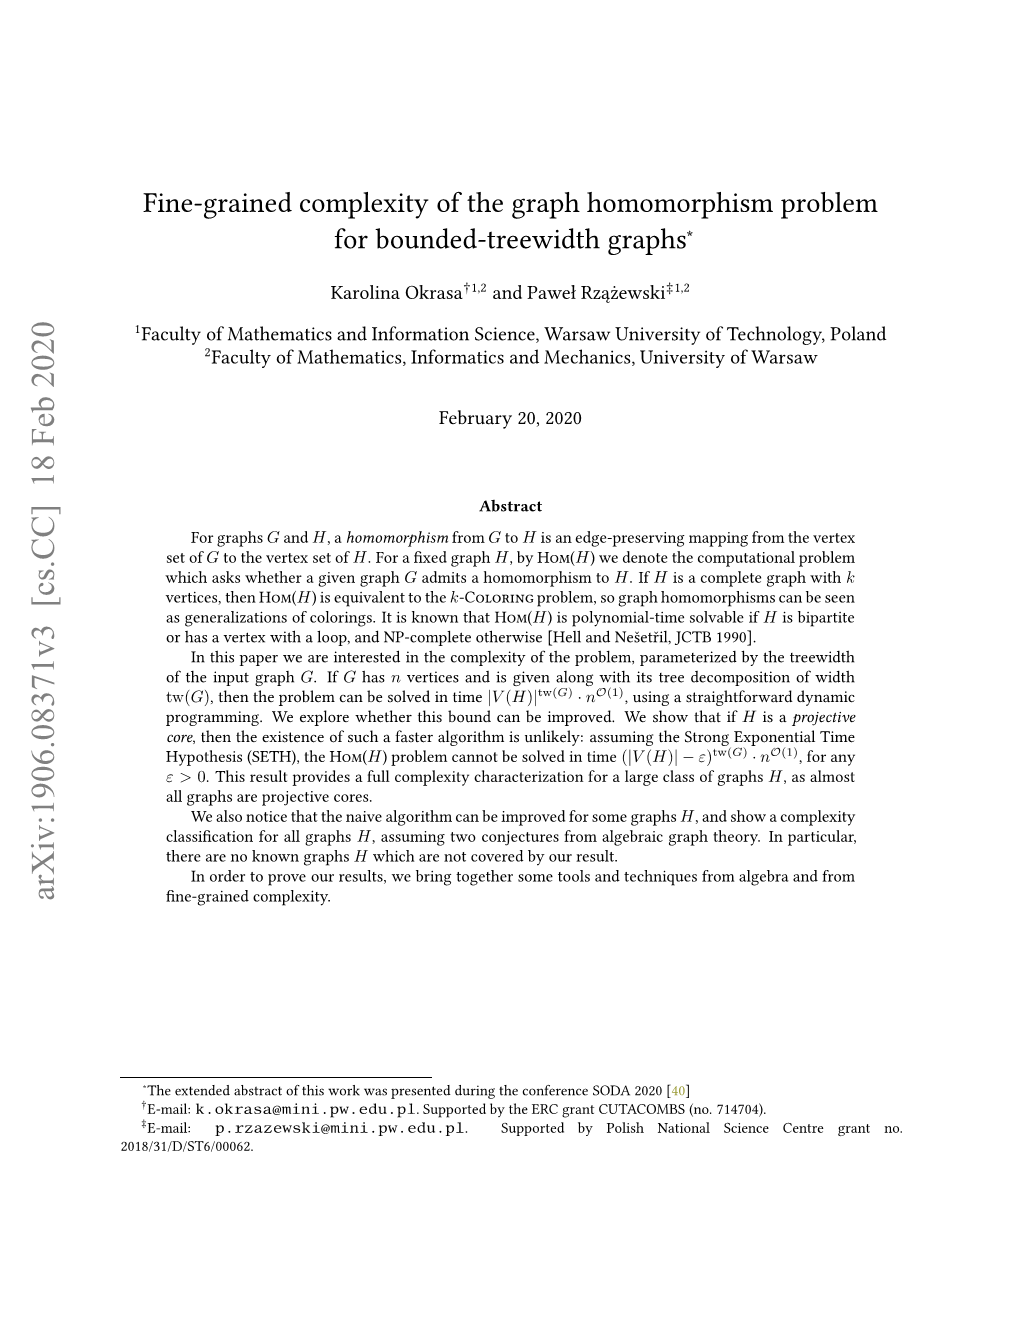 Fine-Grained Complexity of the Graph Homomorphism Problem For